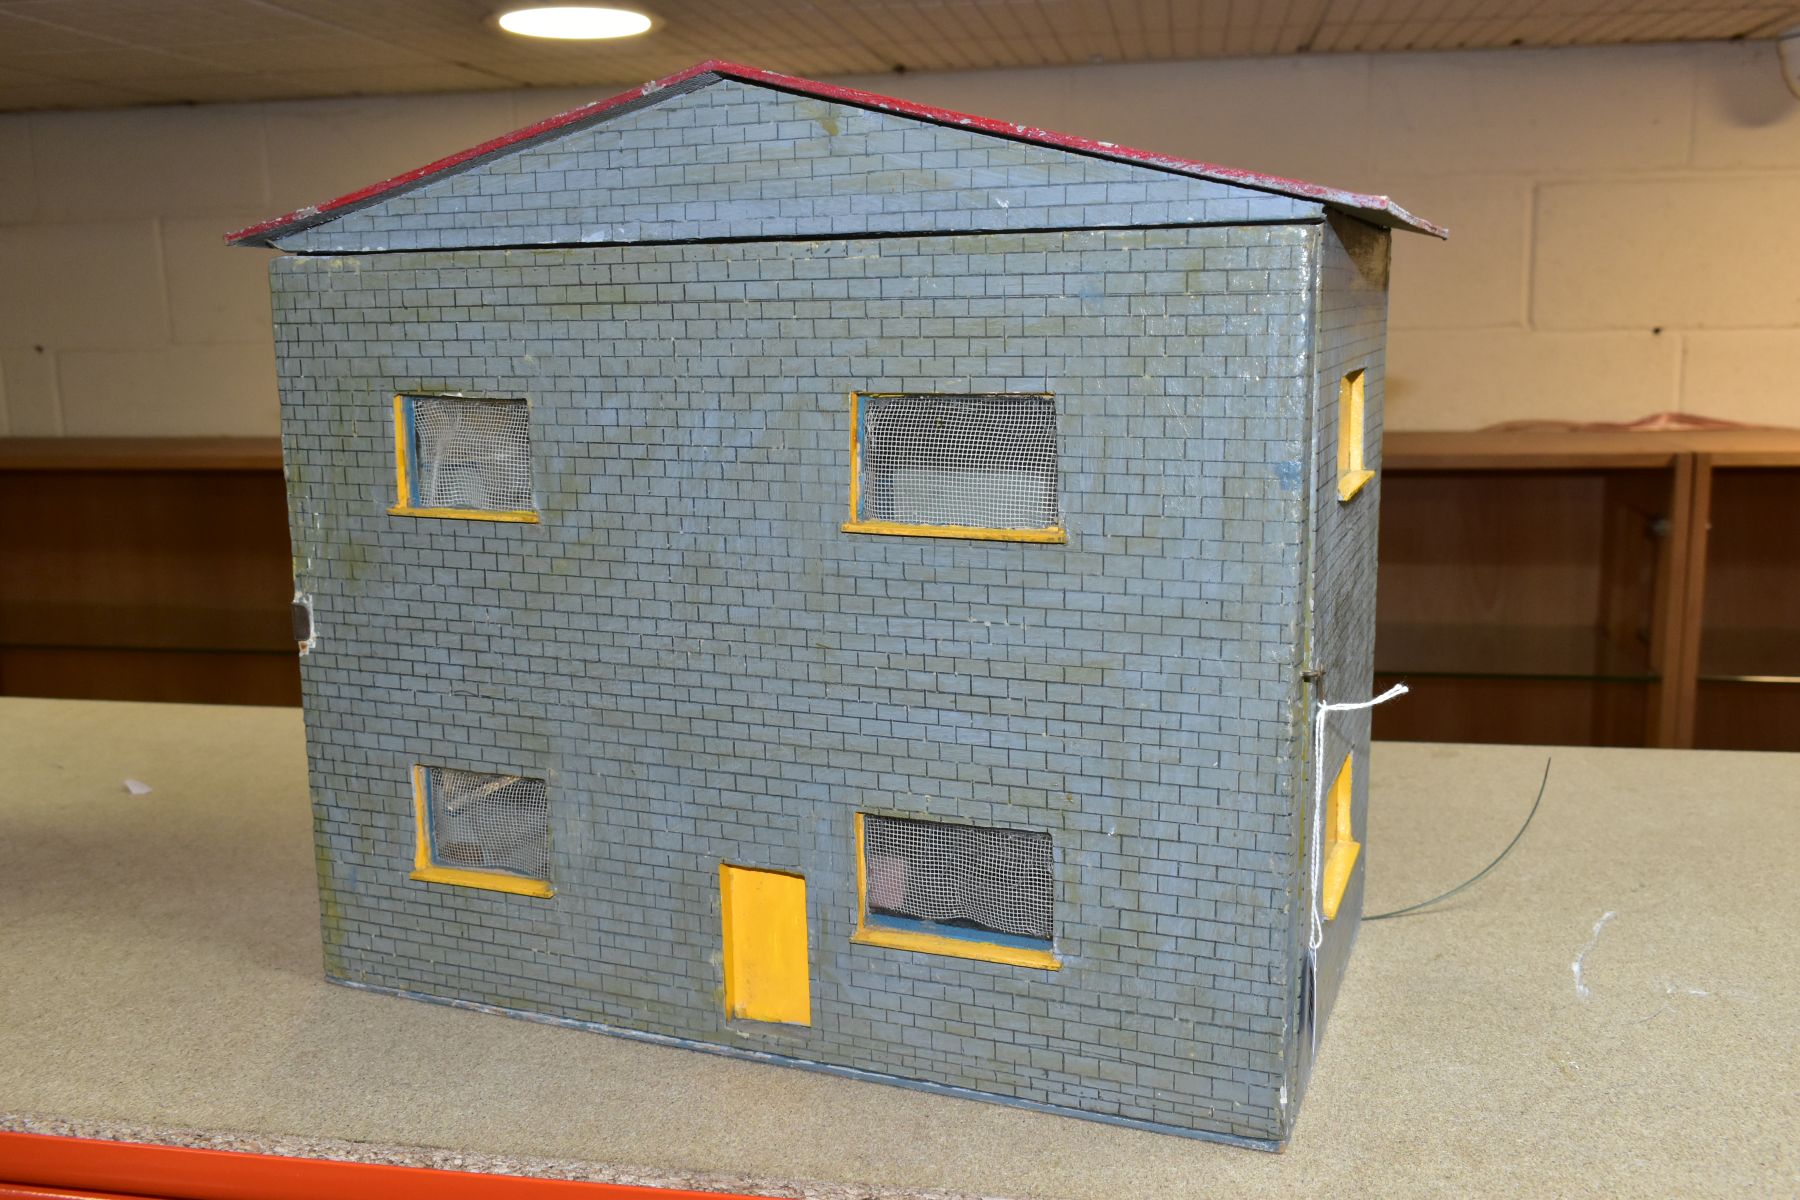 A SCRATCHBUILT WOODEN DOLLS HOUSE, modelled as a modern two storey detached house, removable